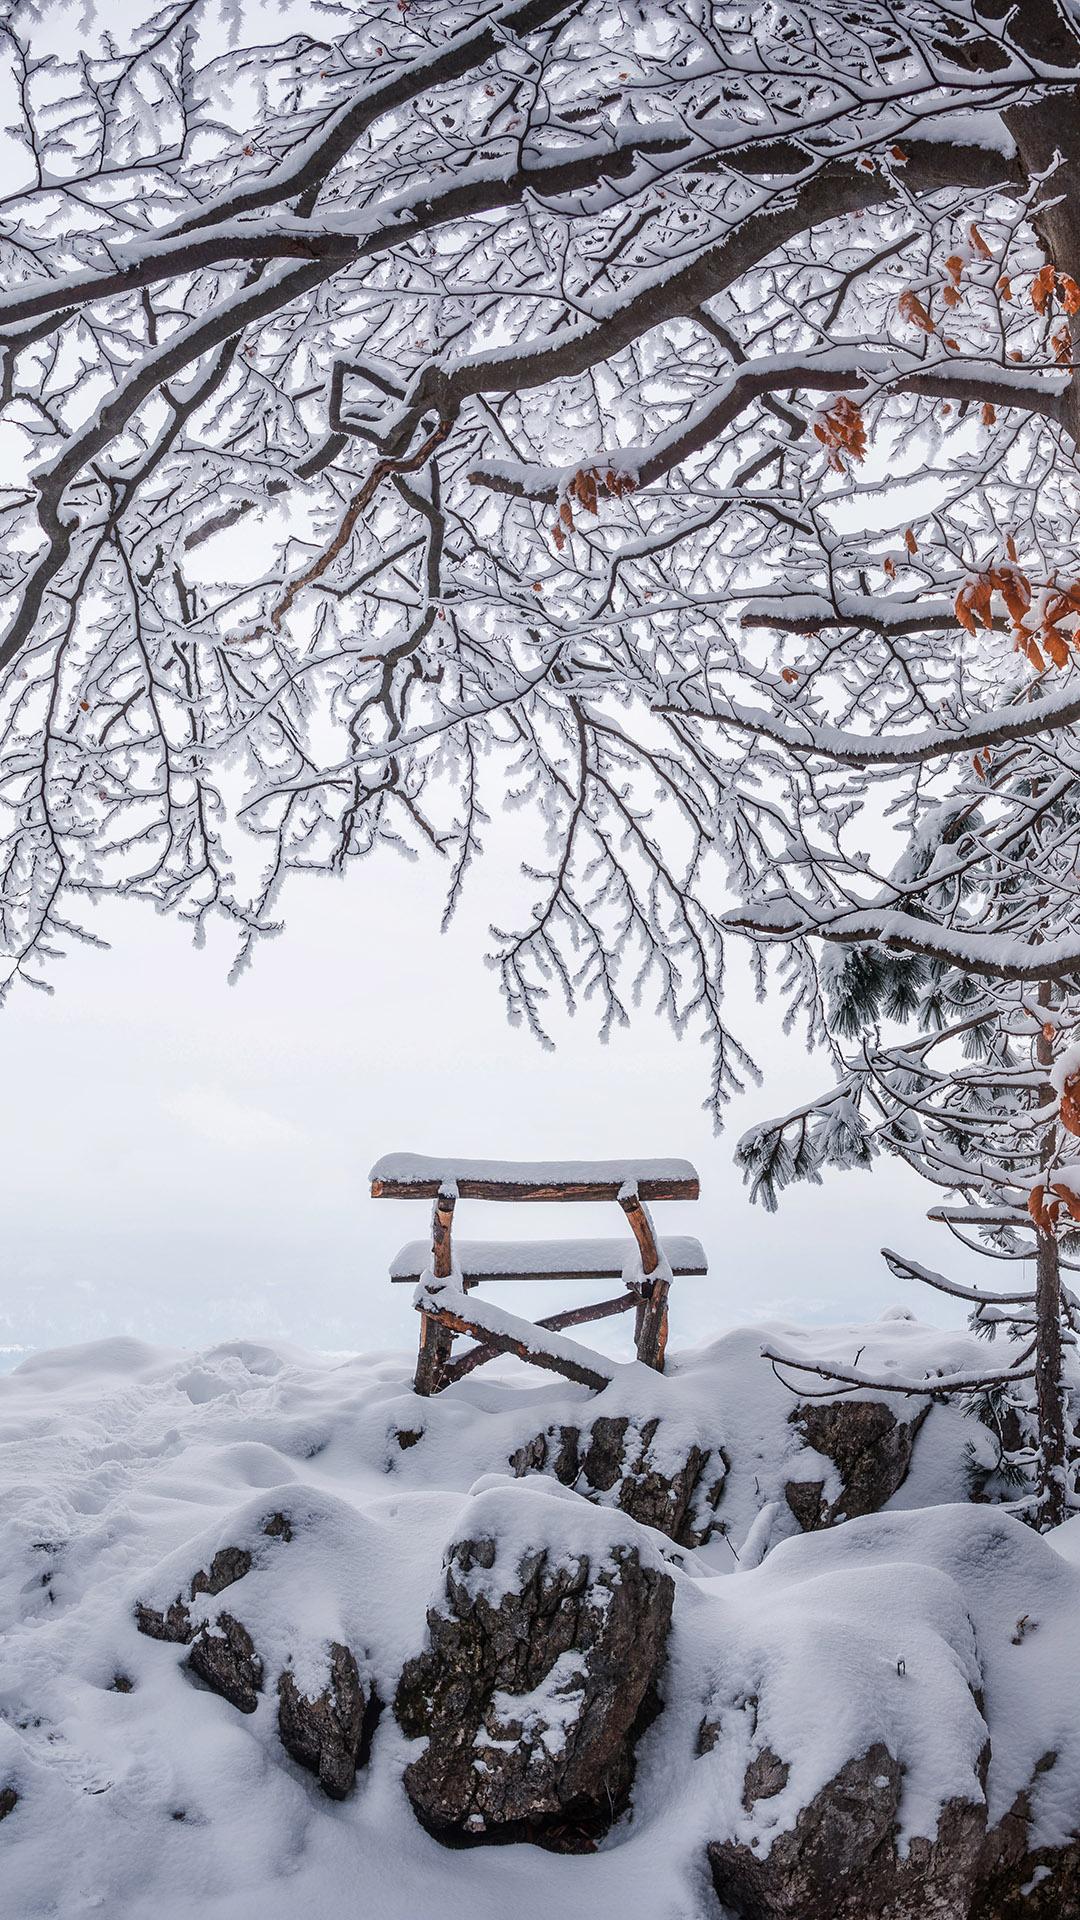 Dreamy Pixel. Free iPhone Wallpaper: A bench under snowy